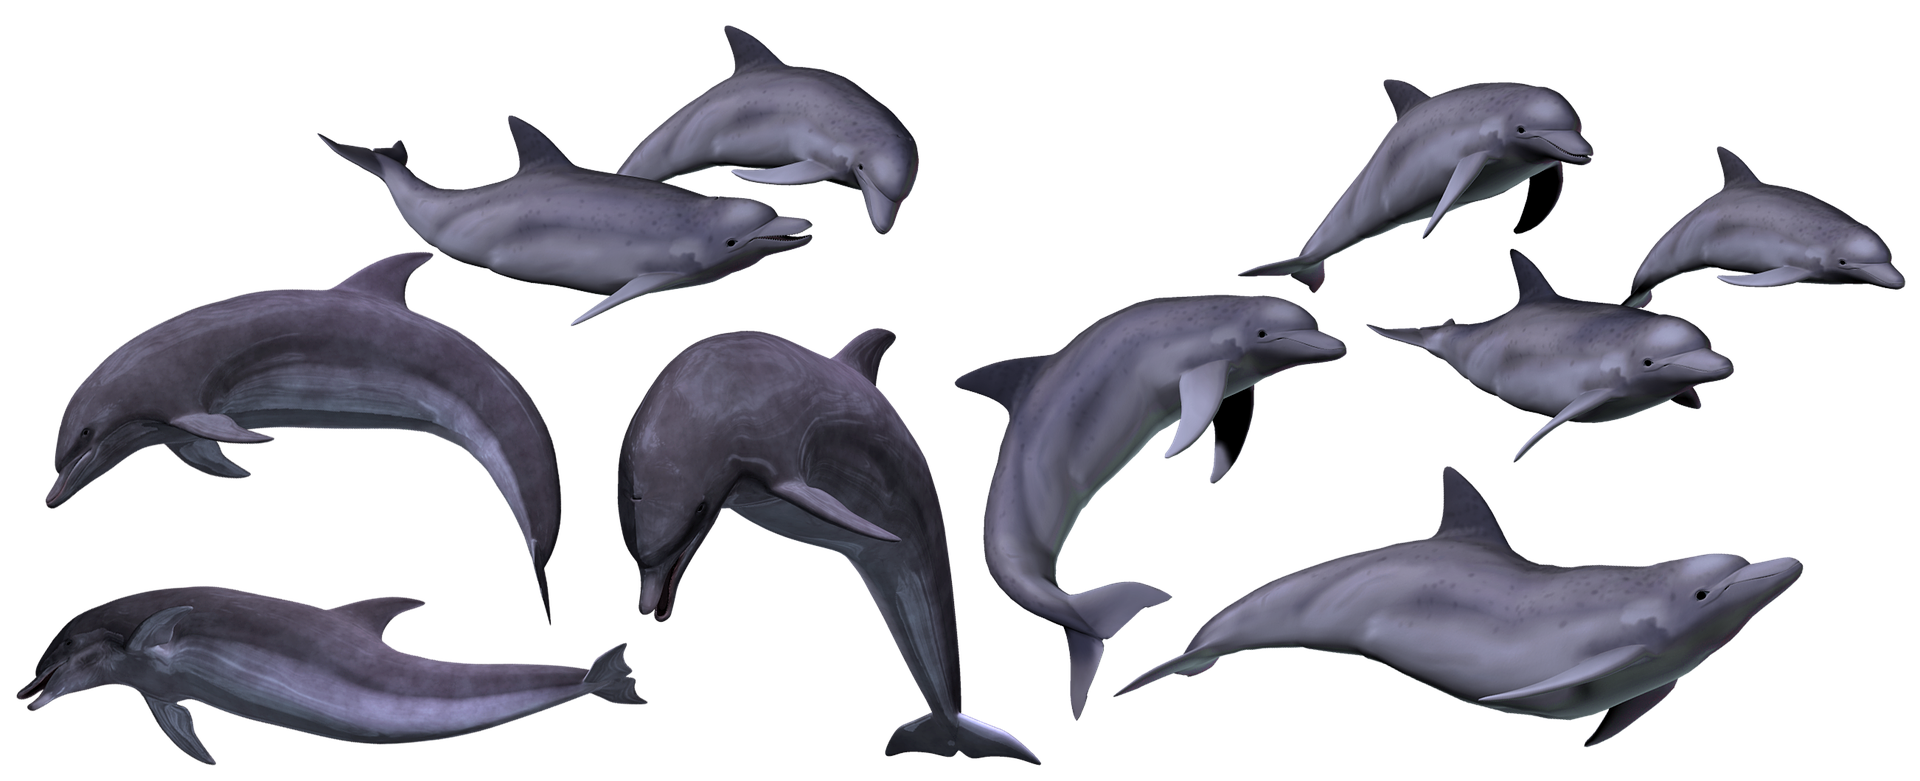 dolphins-3377838_1920.png